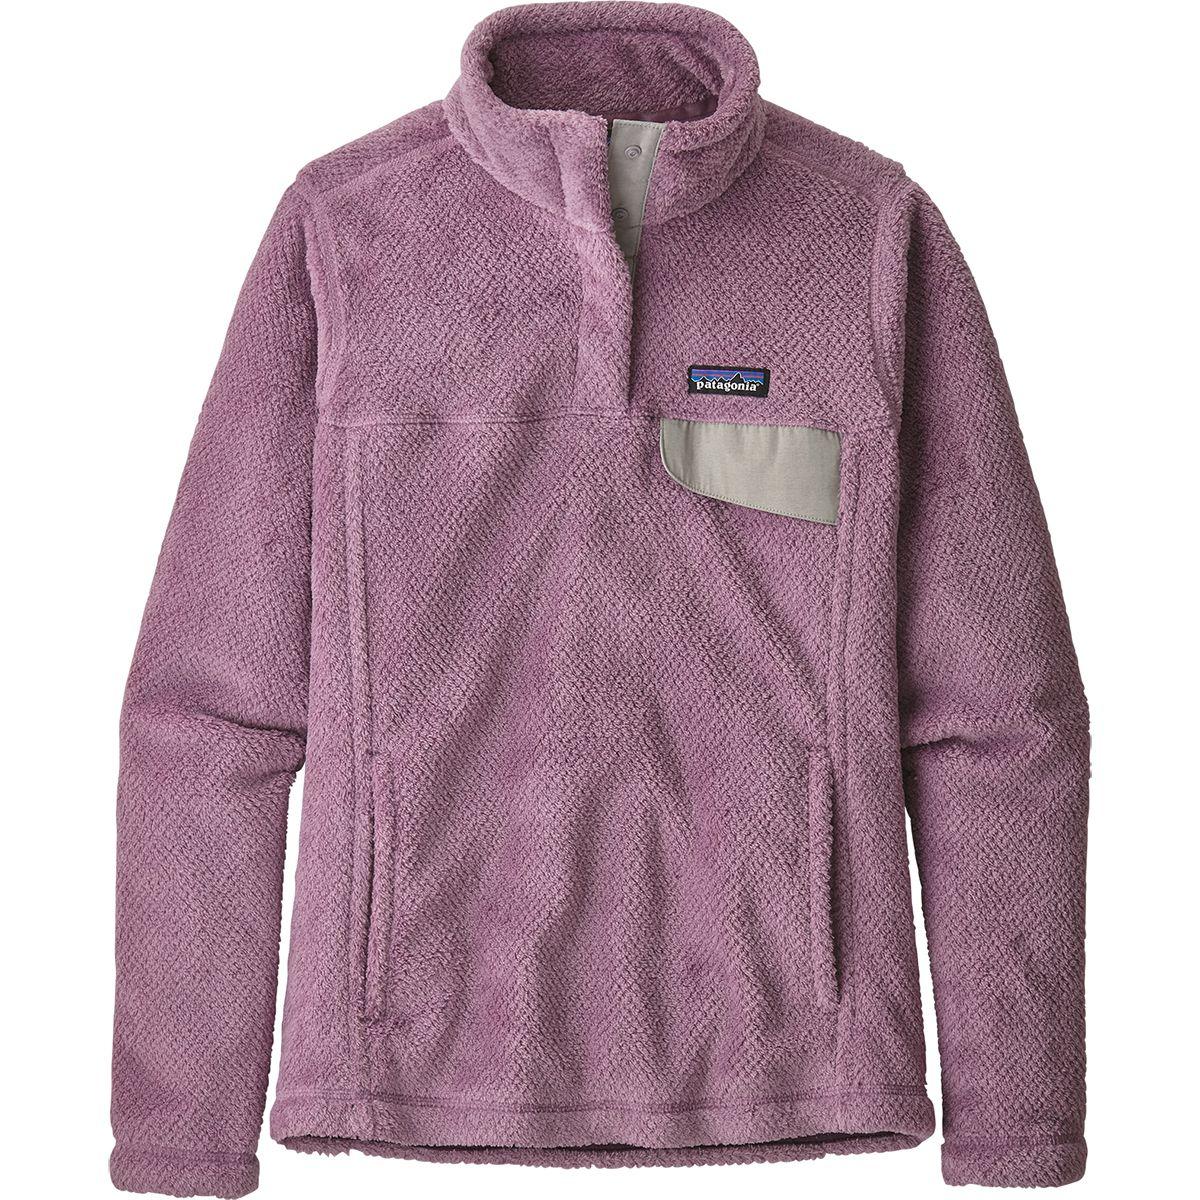 Patagonia Re-tool Snap-t Fleece Pullover in Purple - Lyst